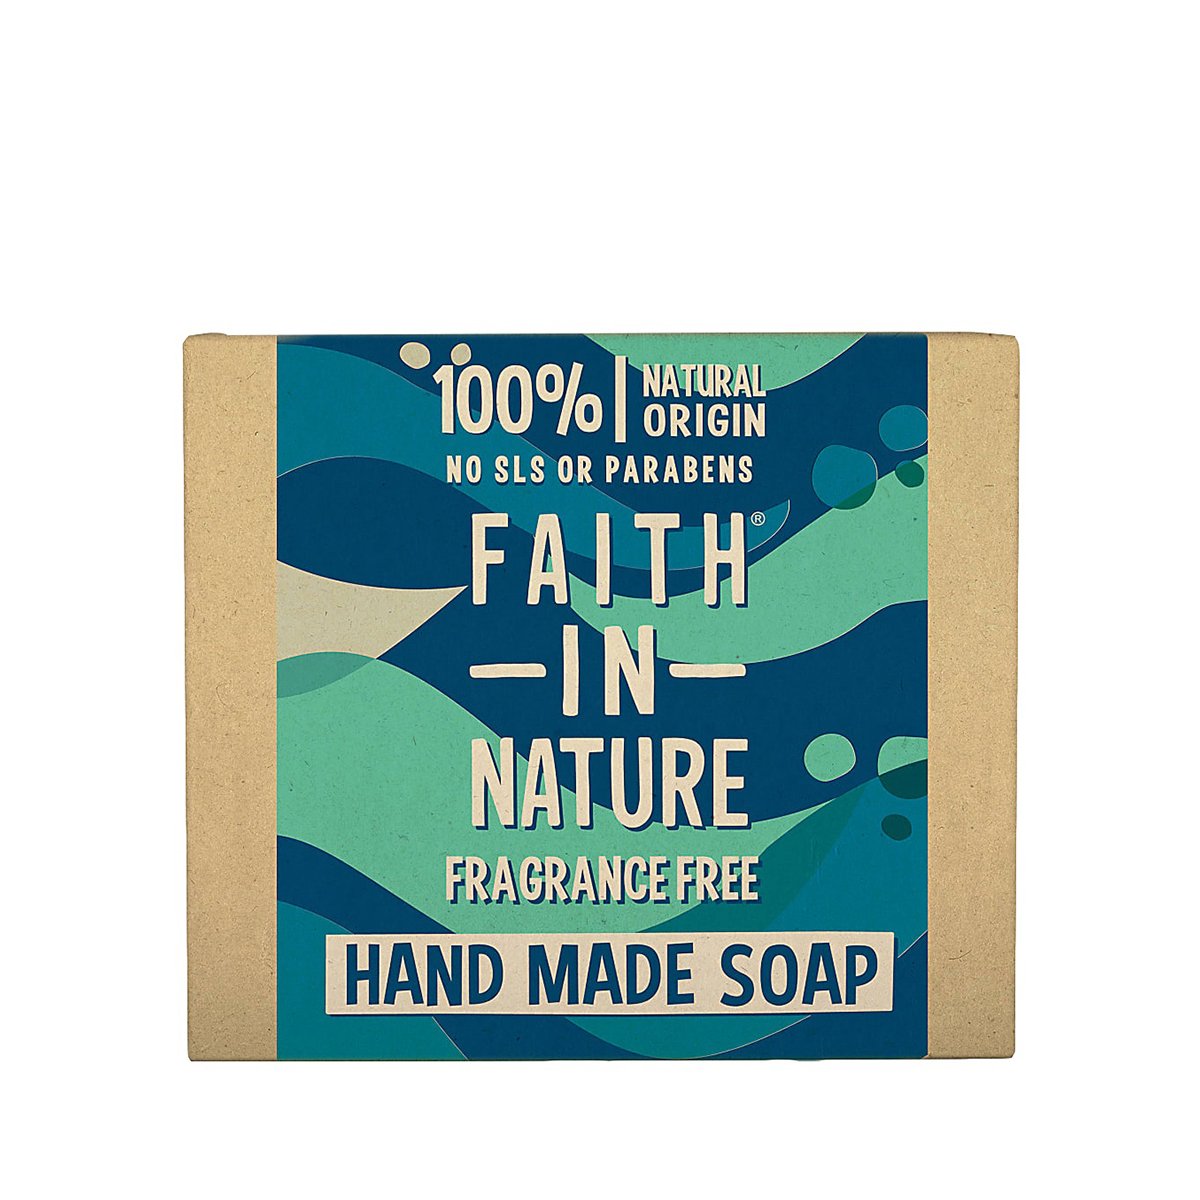 Faith in Nature Unfragranced Hand Made Soap 100g